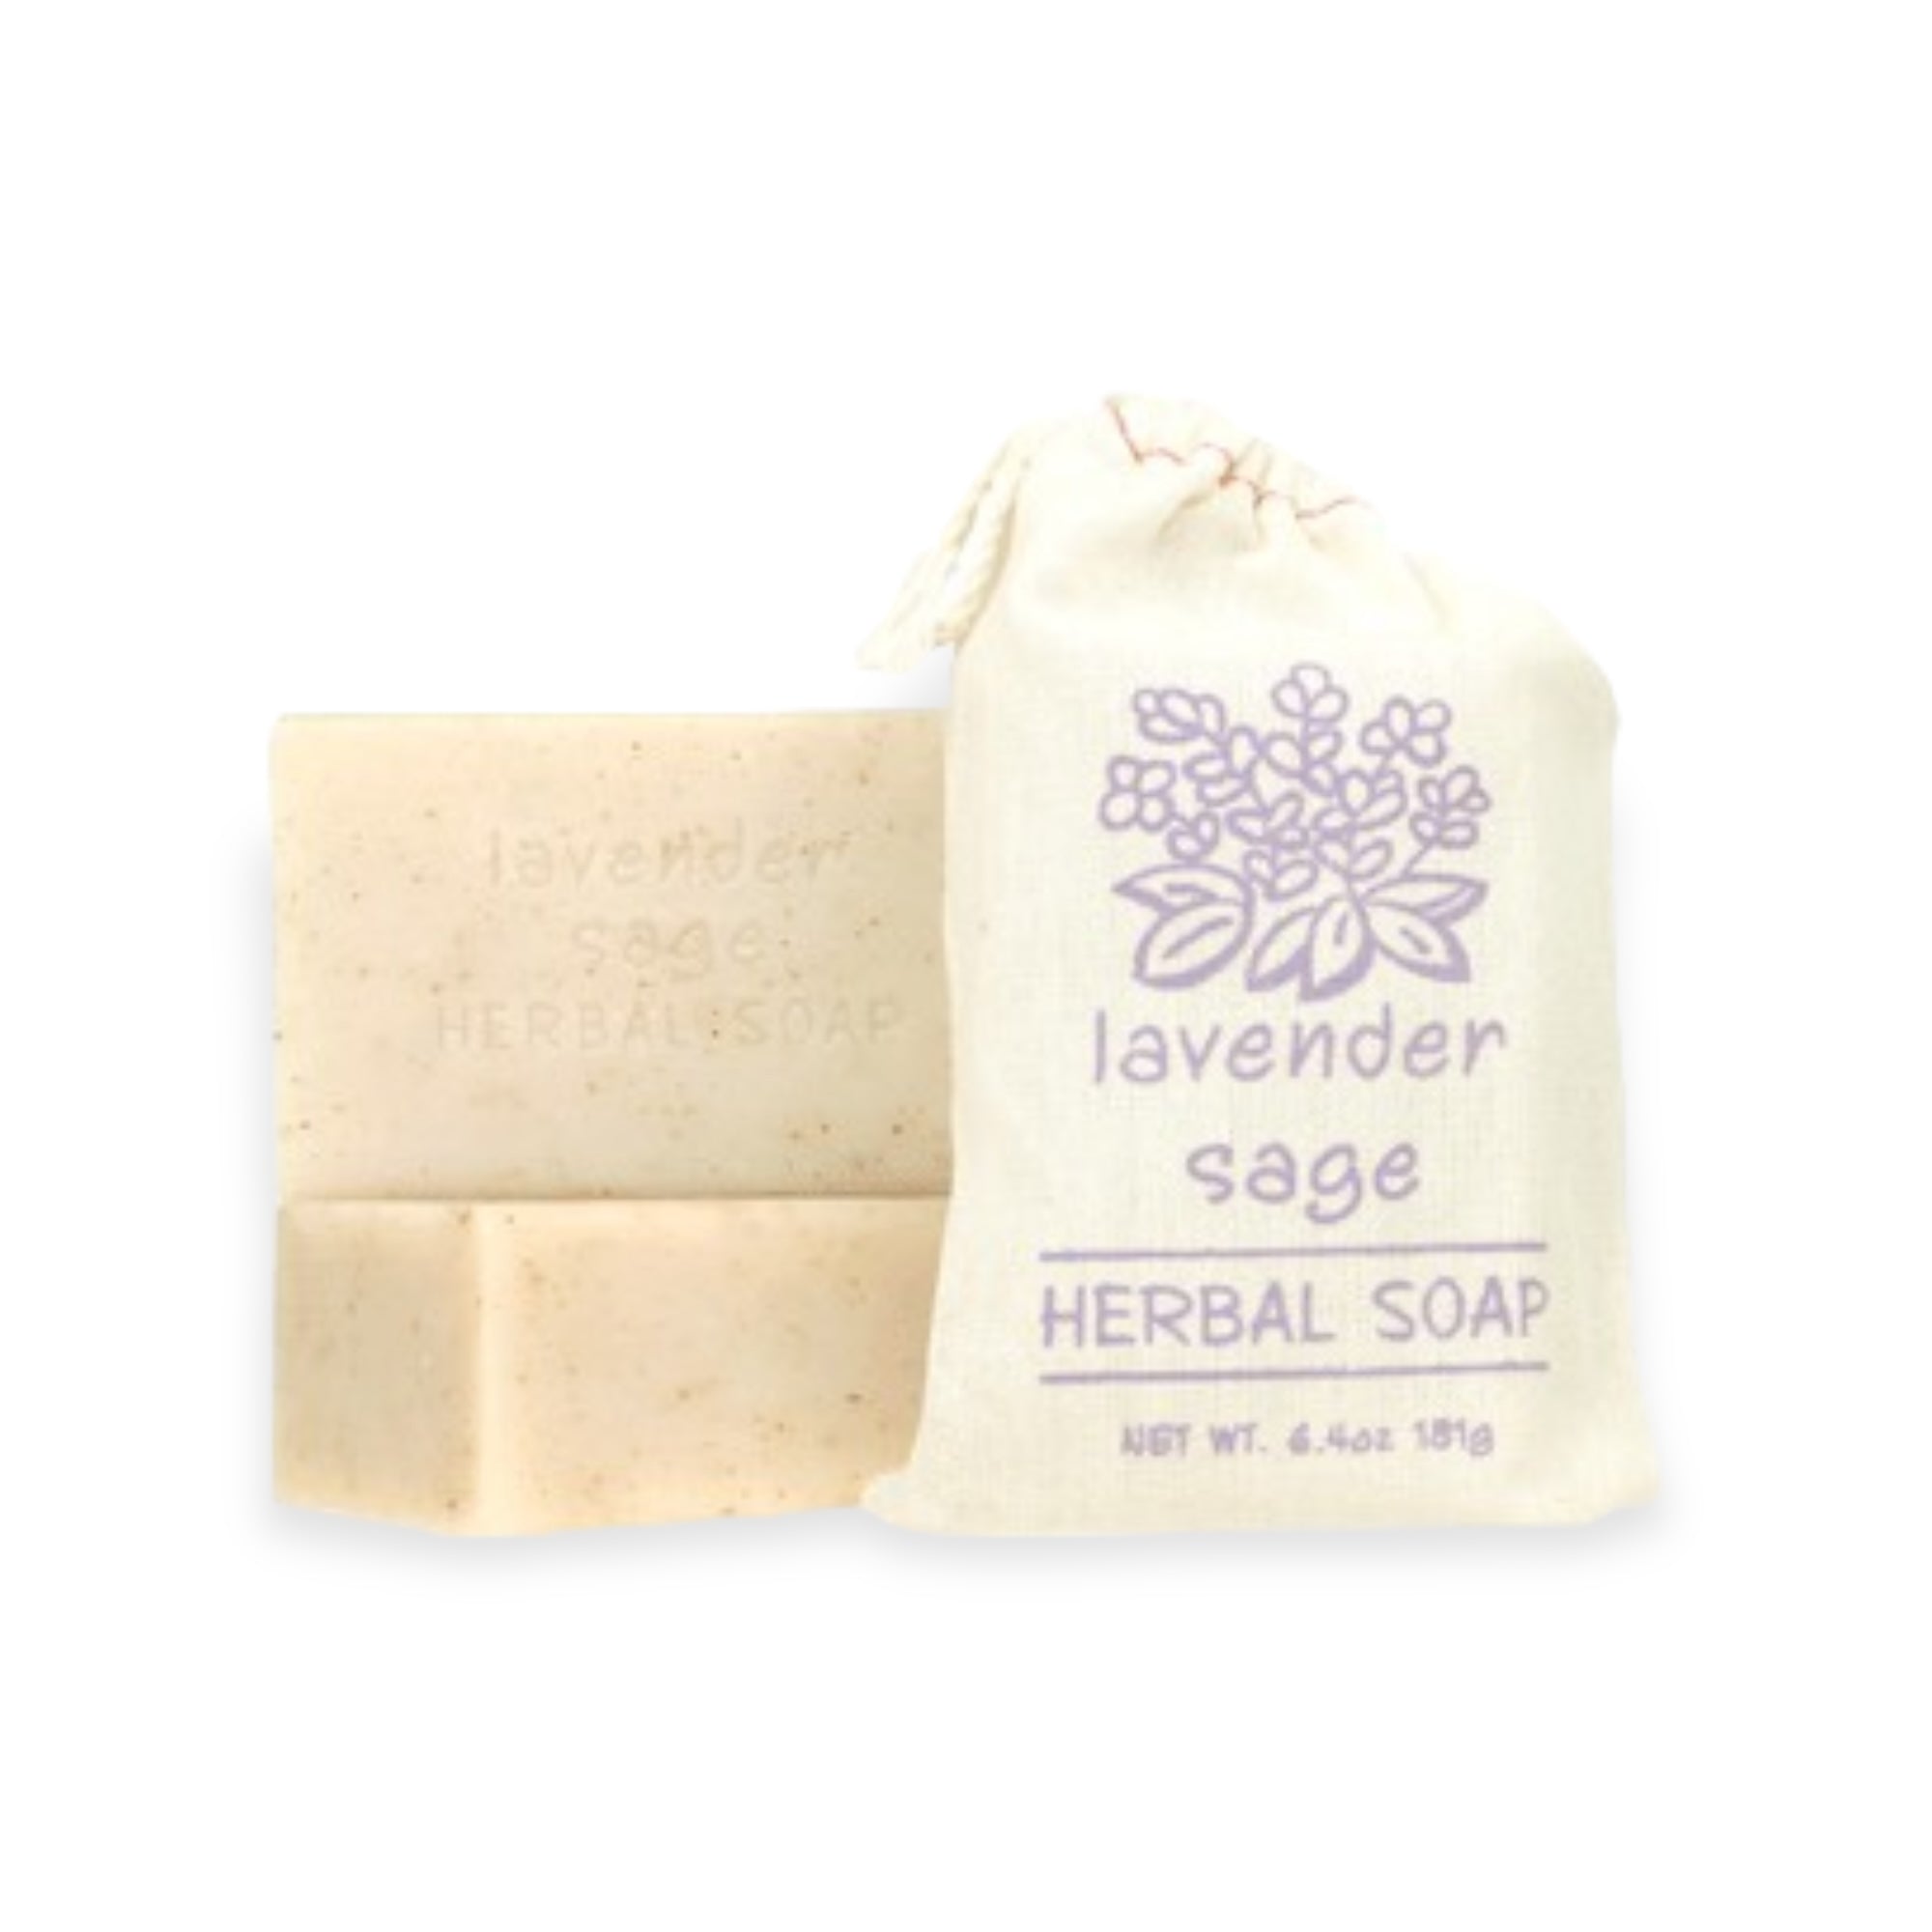 Lavender Sage Herbal Soap by Greenwich Bay Trading Co.